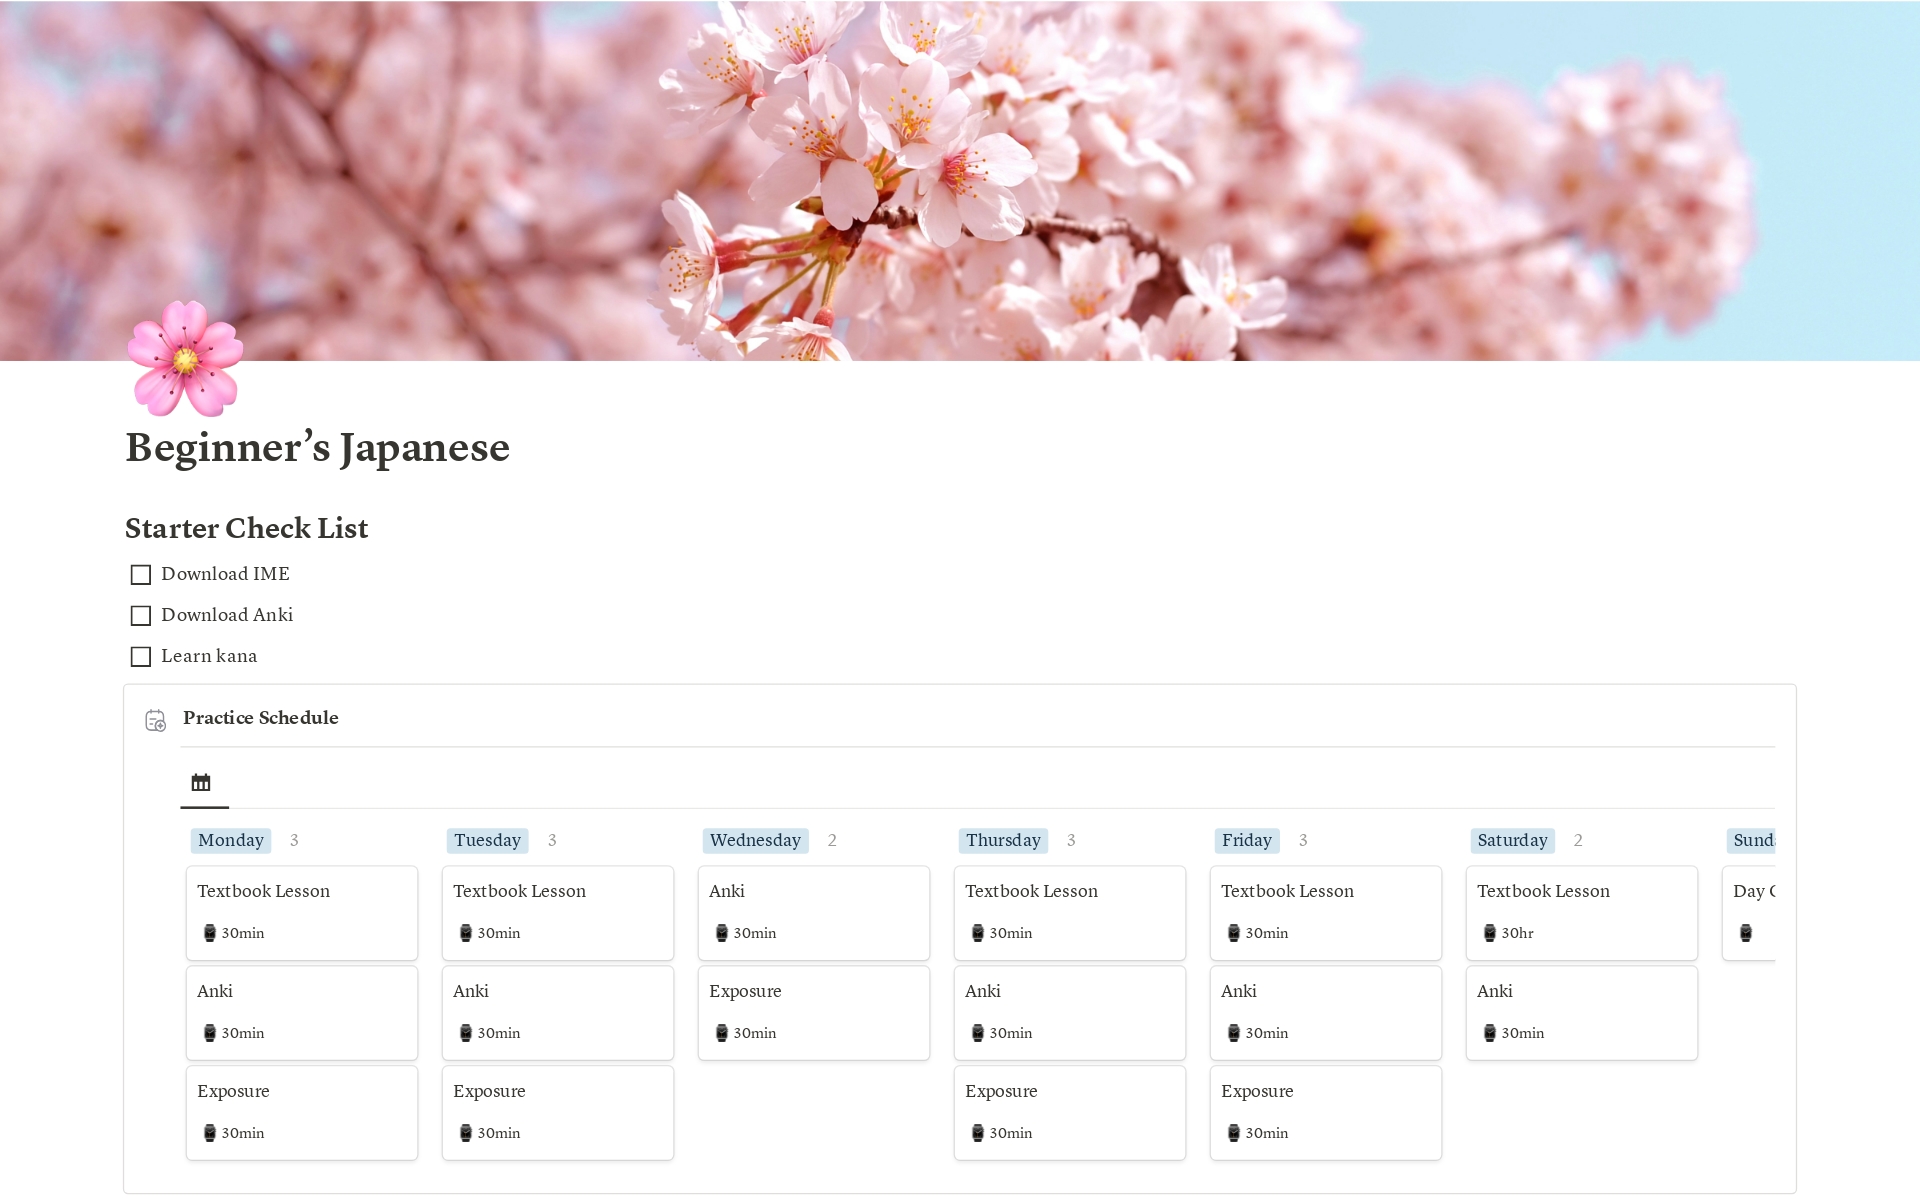 This is a schedule for beginner Japanese learners. For more information, visit https://naturallanguagejourney.com/japanese-language-pathway/